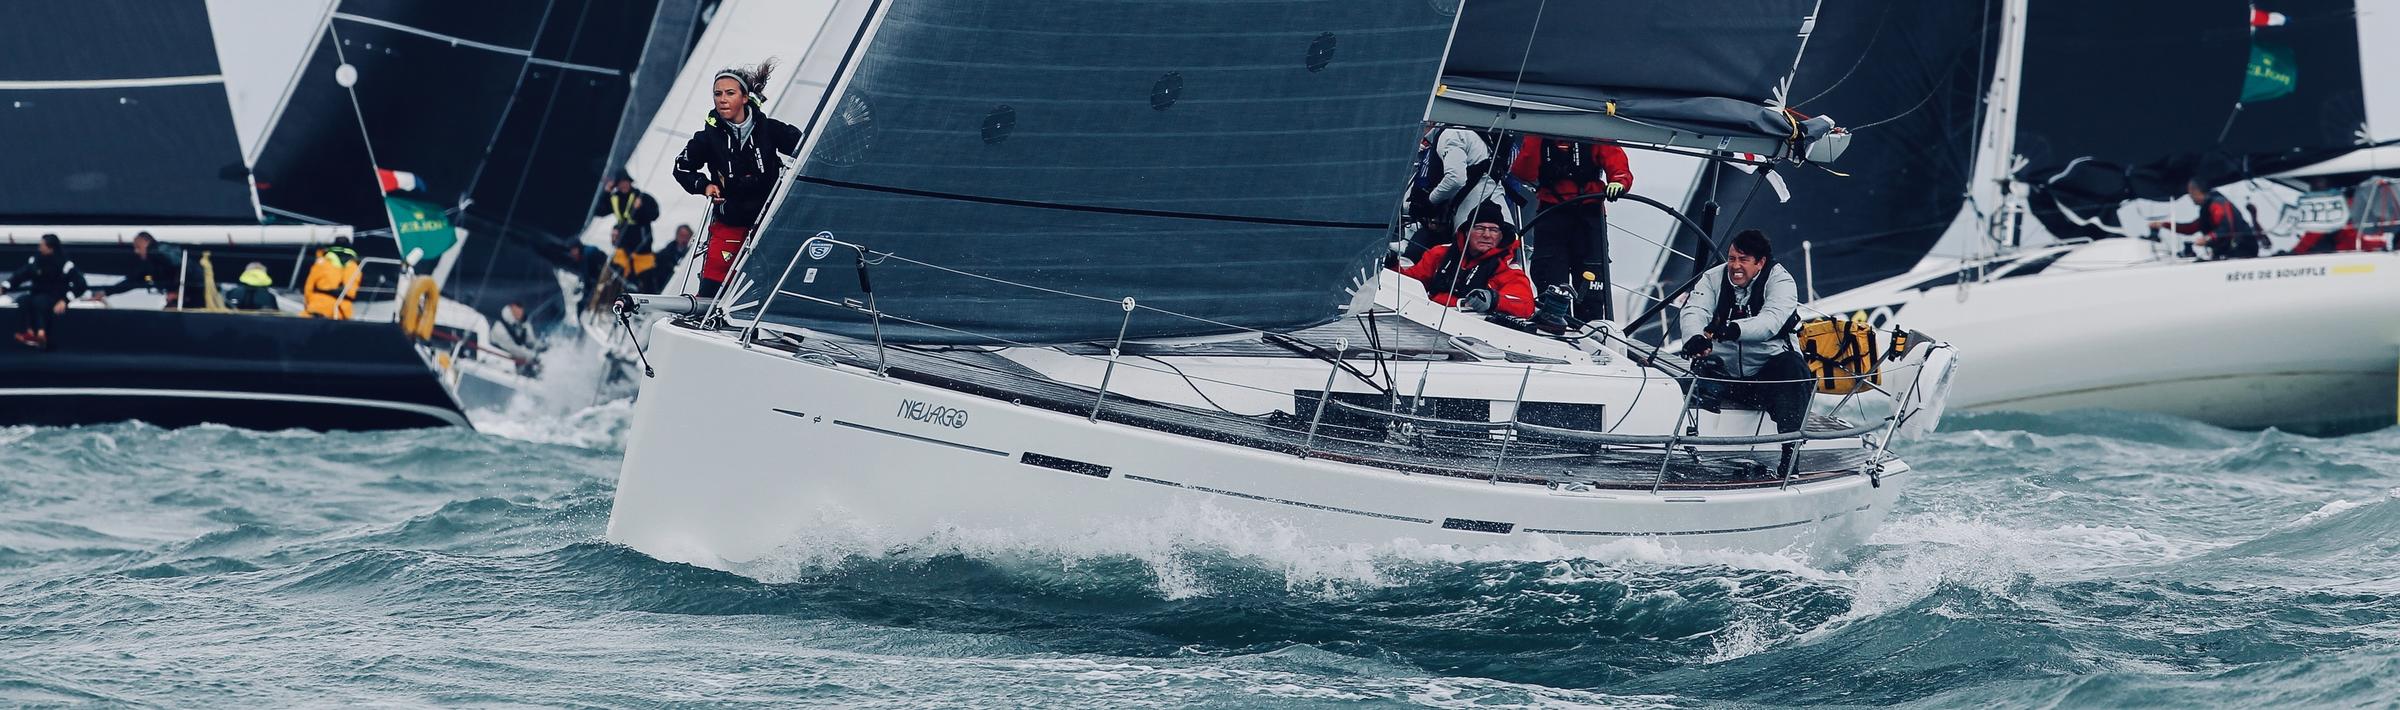 SSE Renewables Round Ireland – Ireland’s Premier offshore Yacht Race
22 June 2024
The second longest race in the Royal Ocean Racing Club 2024 Season’s Points Championship starts from Wicklow this Saturday.